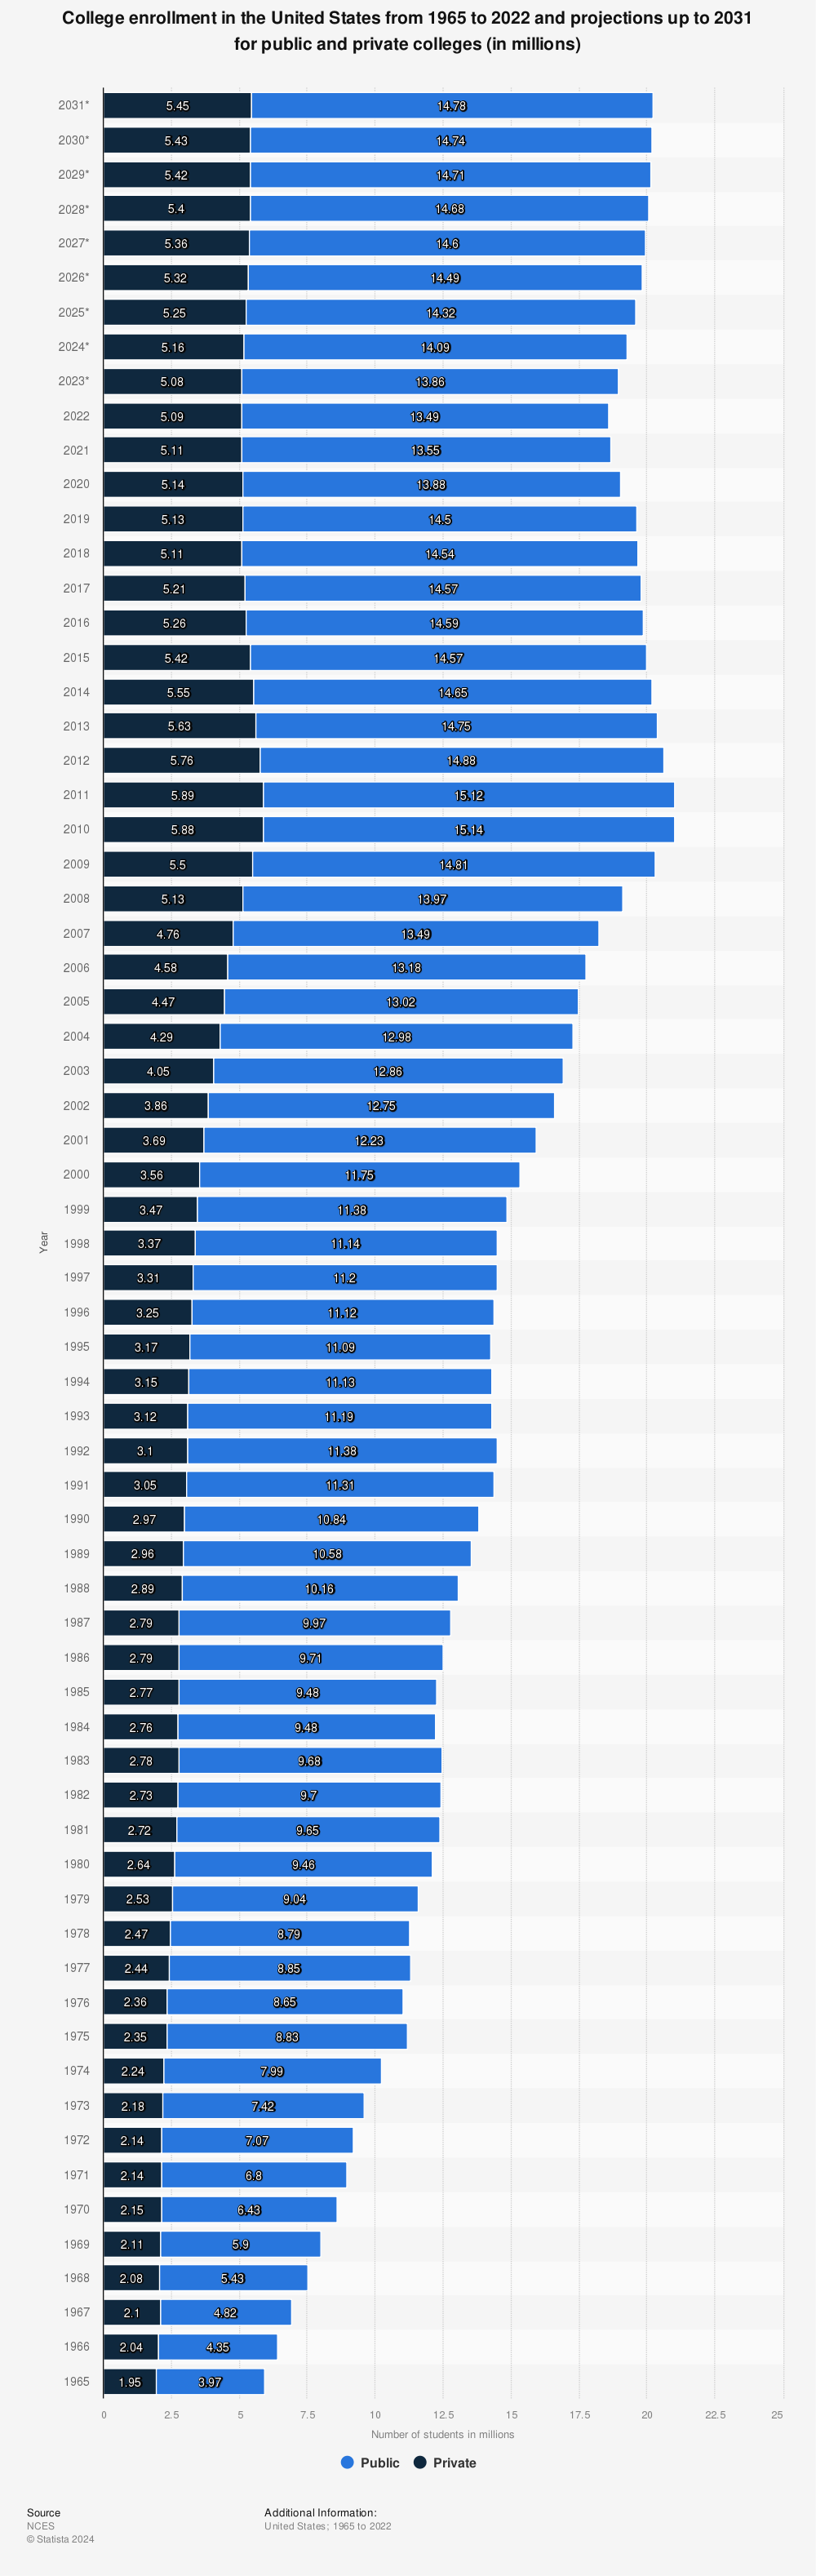 Statistic: College enrollment in the United States from 1965 to 2020 and projections up to 2030 for public and private colleges (in millions) | Statista